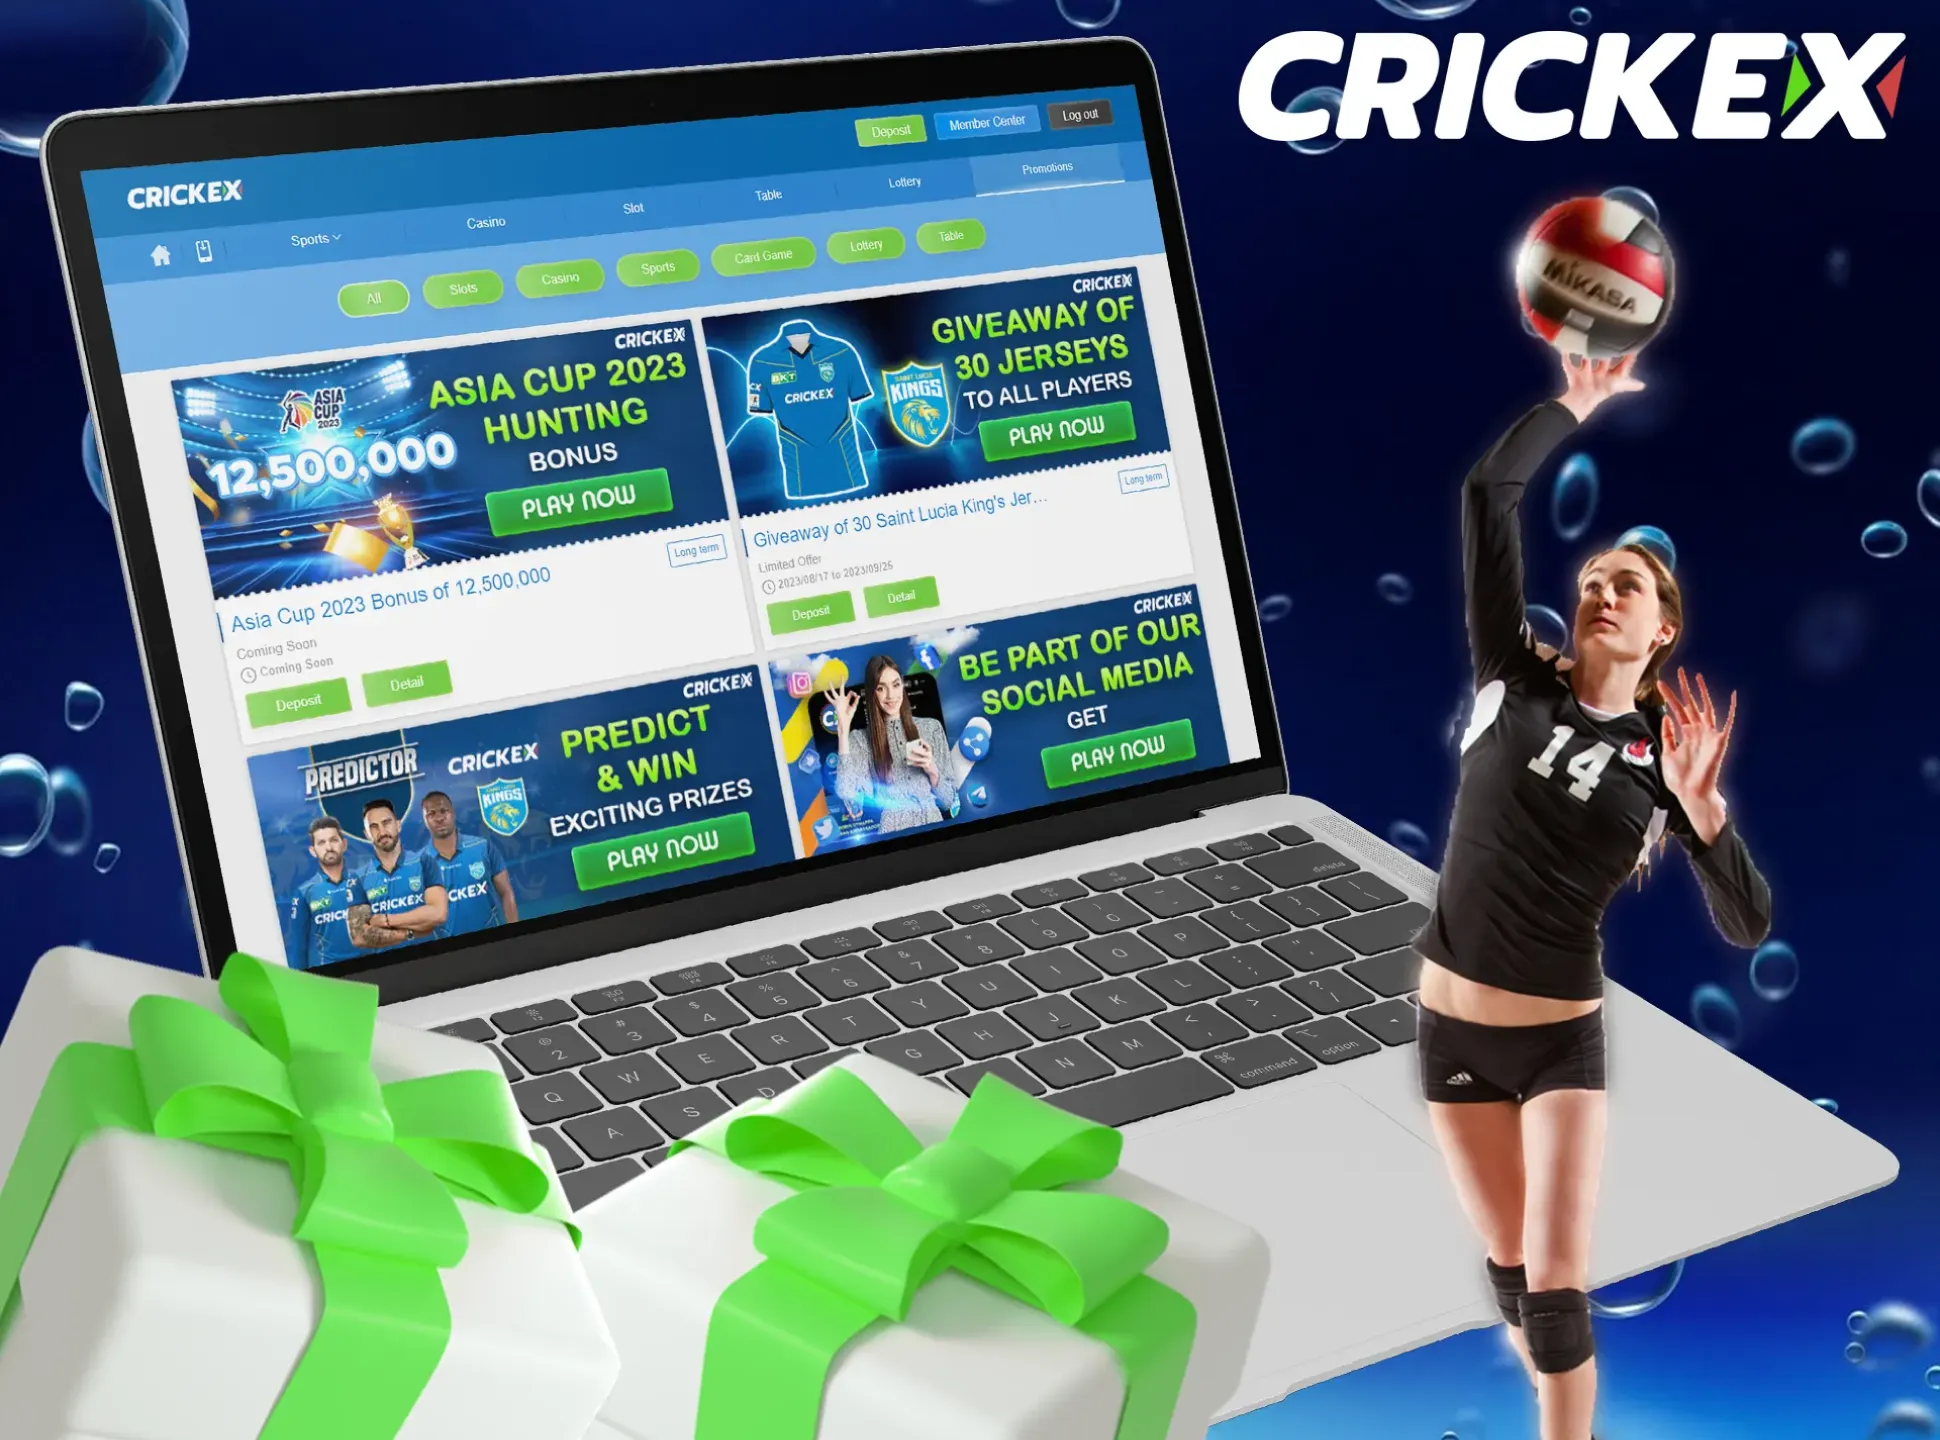 Make bets on volleyball matches and win additional money with Crickex bonuses.